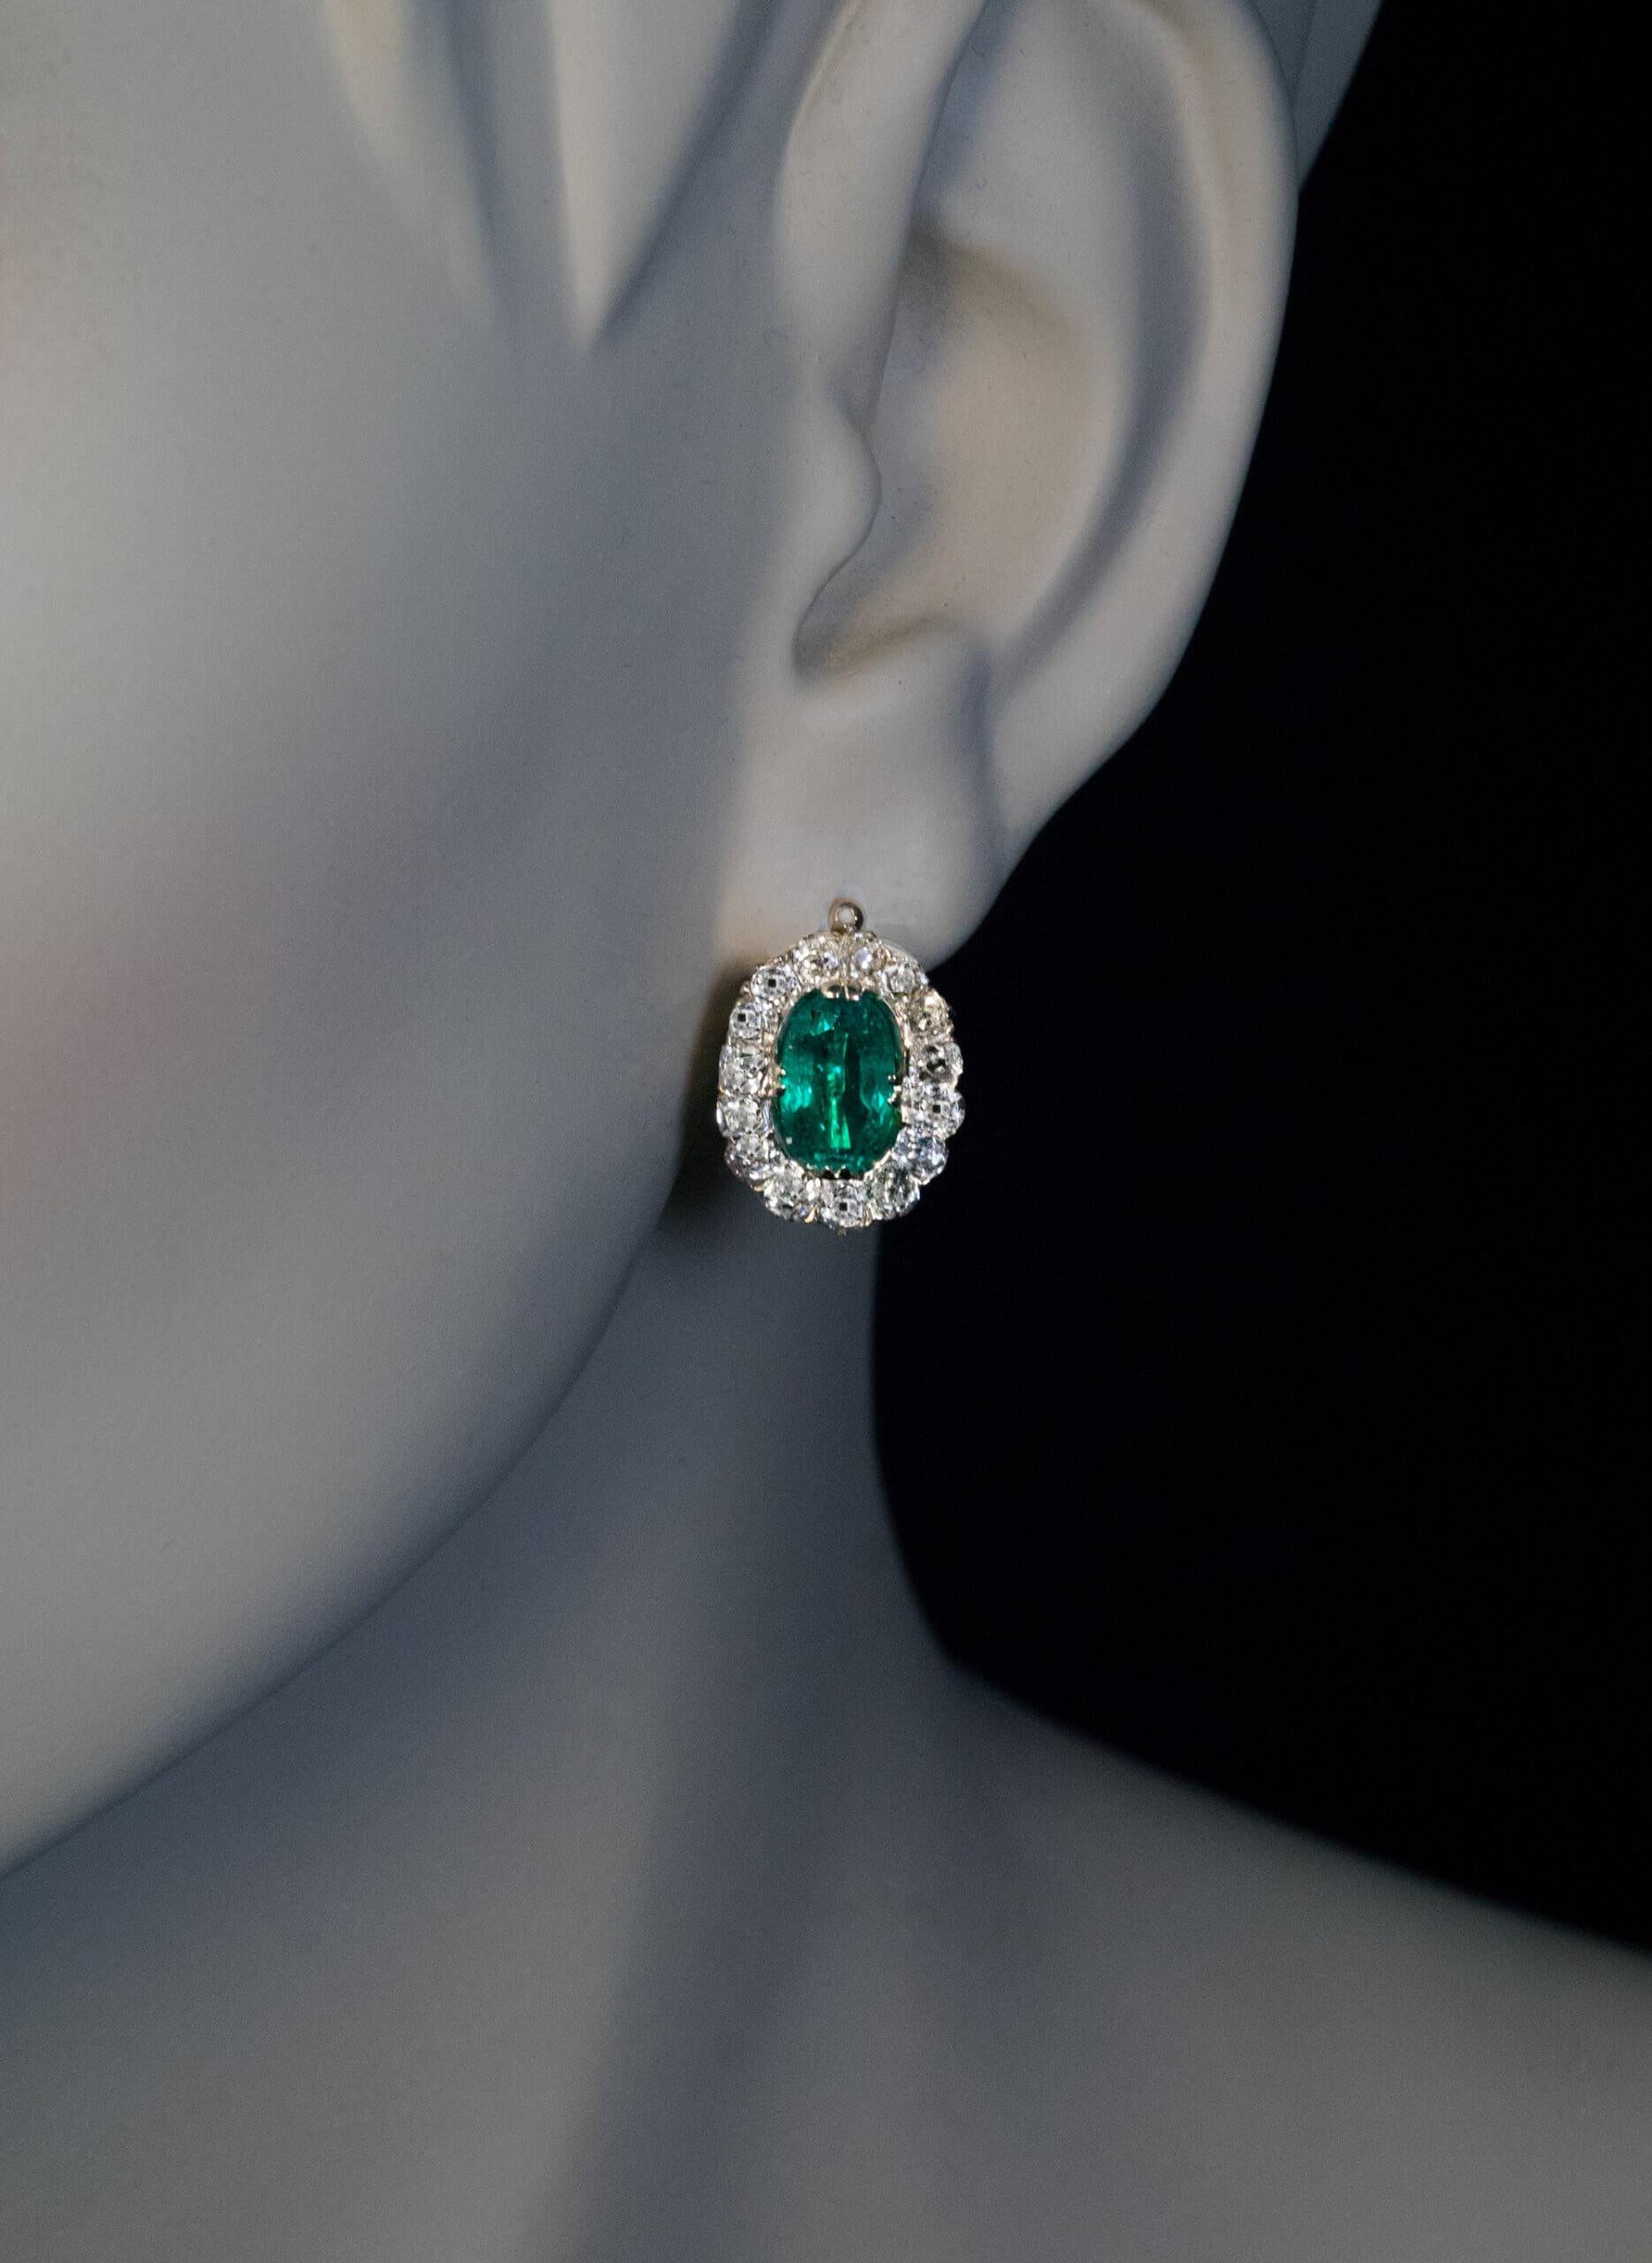 Russia, circa 1880.  These classic Victorian era 14K gold cluster earrings feature a well matched pair of excellent Colombian emeralds (1.96 carats and 1.67 carats). The emeralds are surrounded by chunky old mine cut diamonds.  Combined emerald